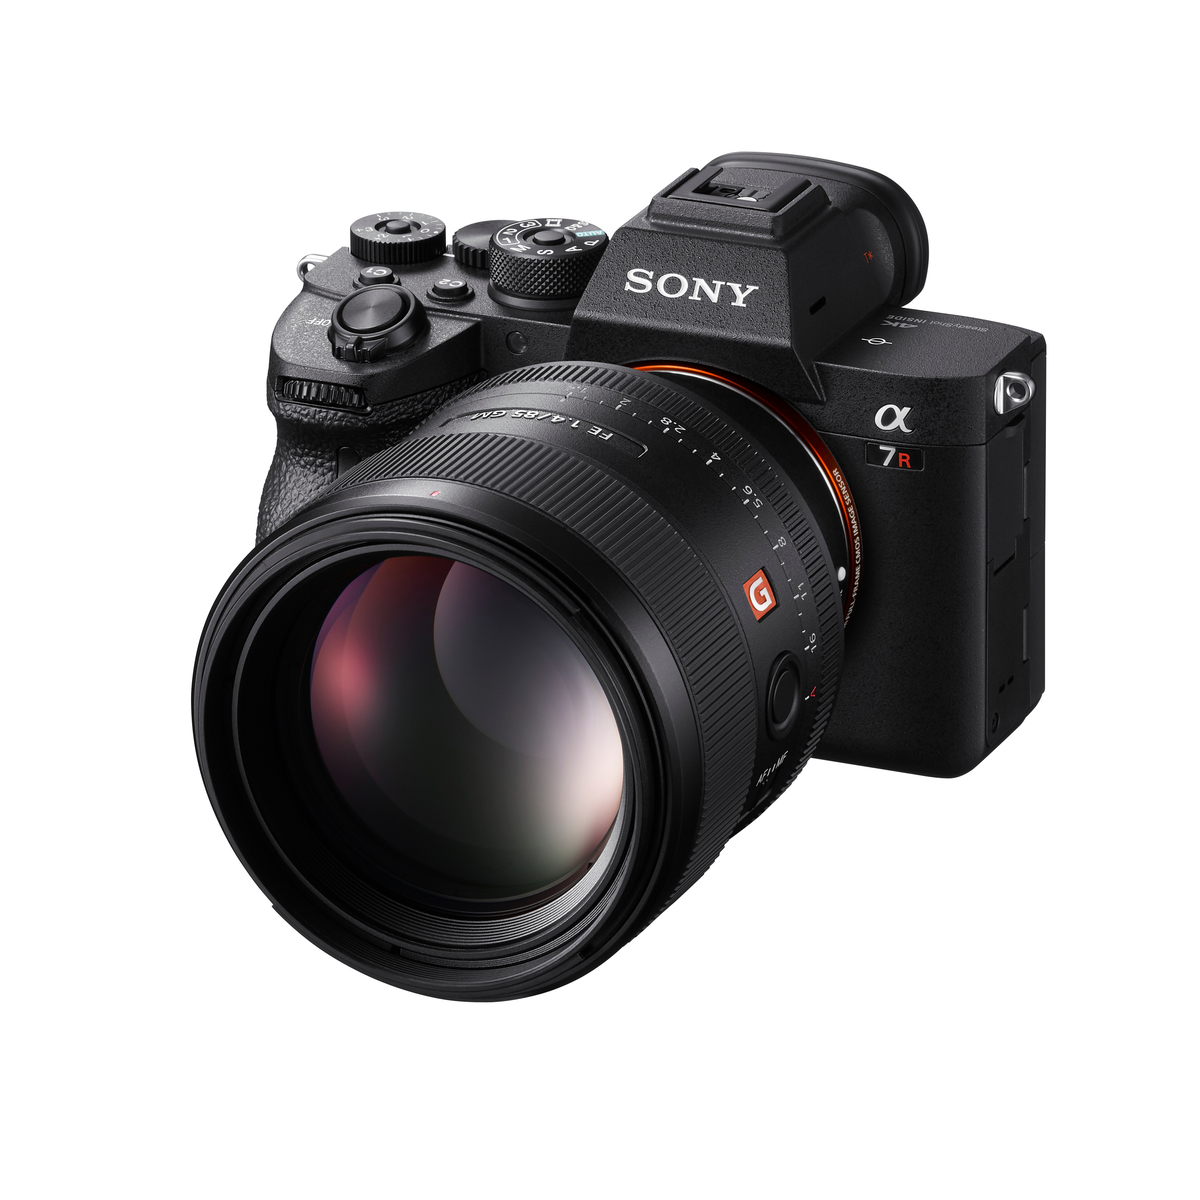 Sony launches Alpha 7R IV mirrorless camera in India!